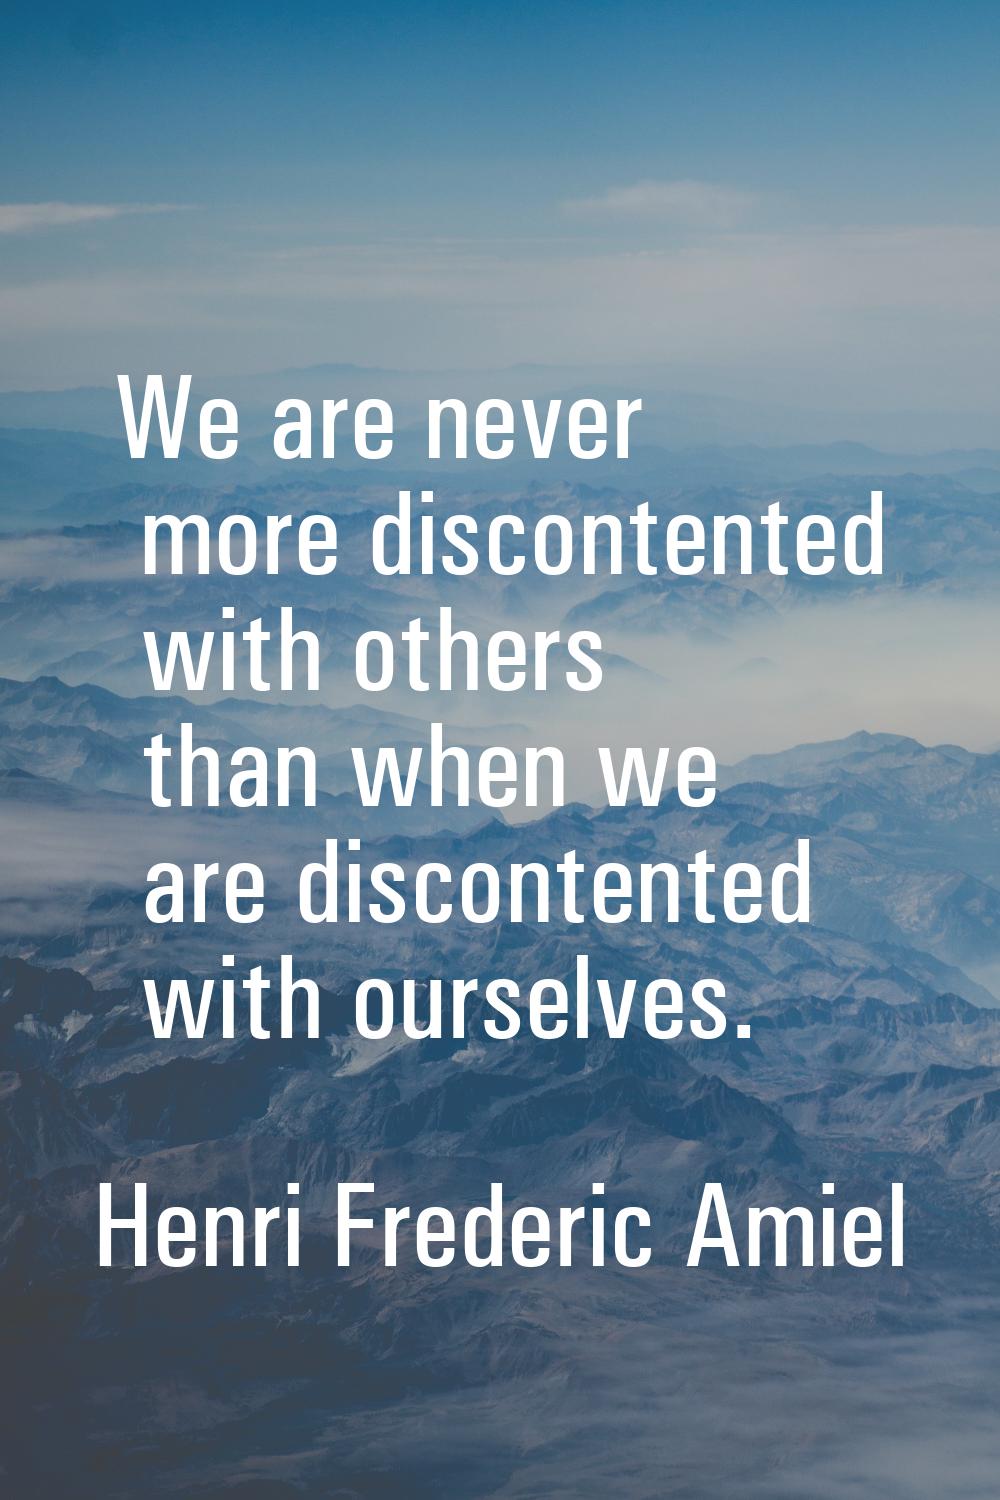 We are never more discontented with others than when we are discontented with ourselves.